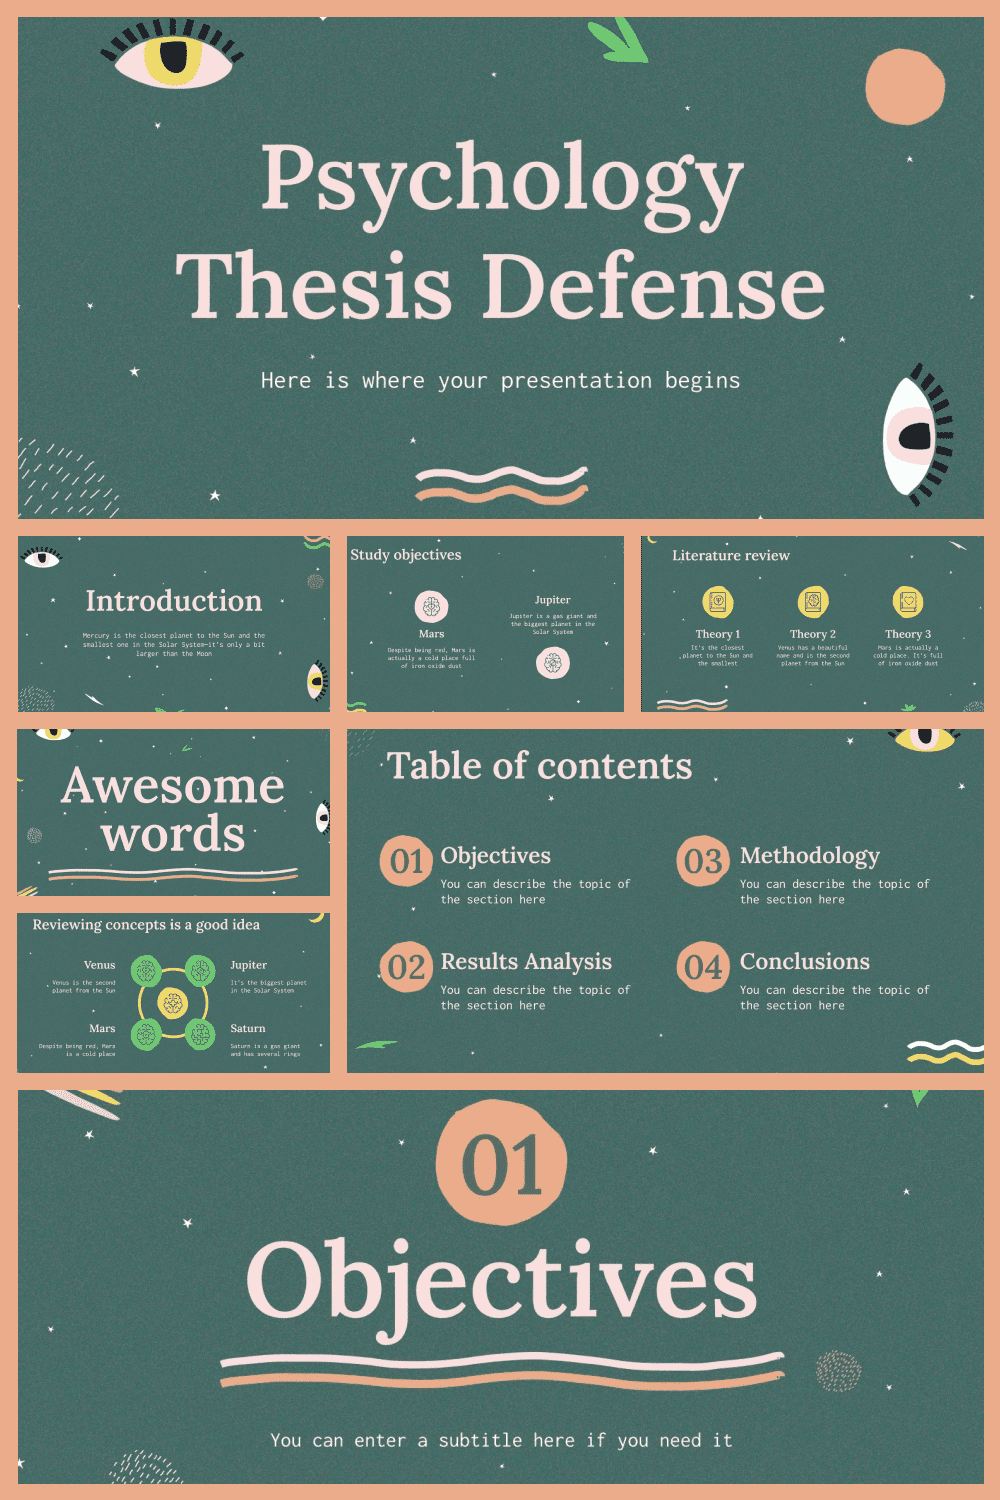 Psychology thesis defense powerpoint template.